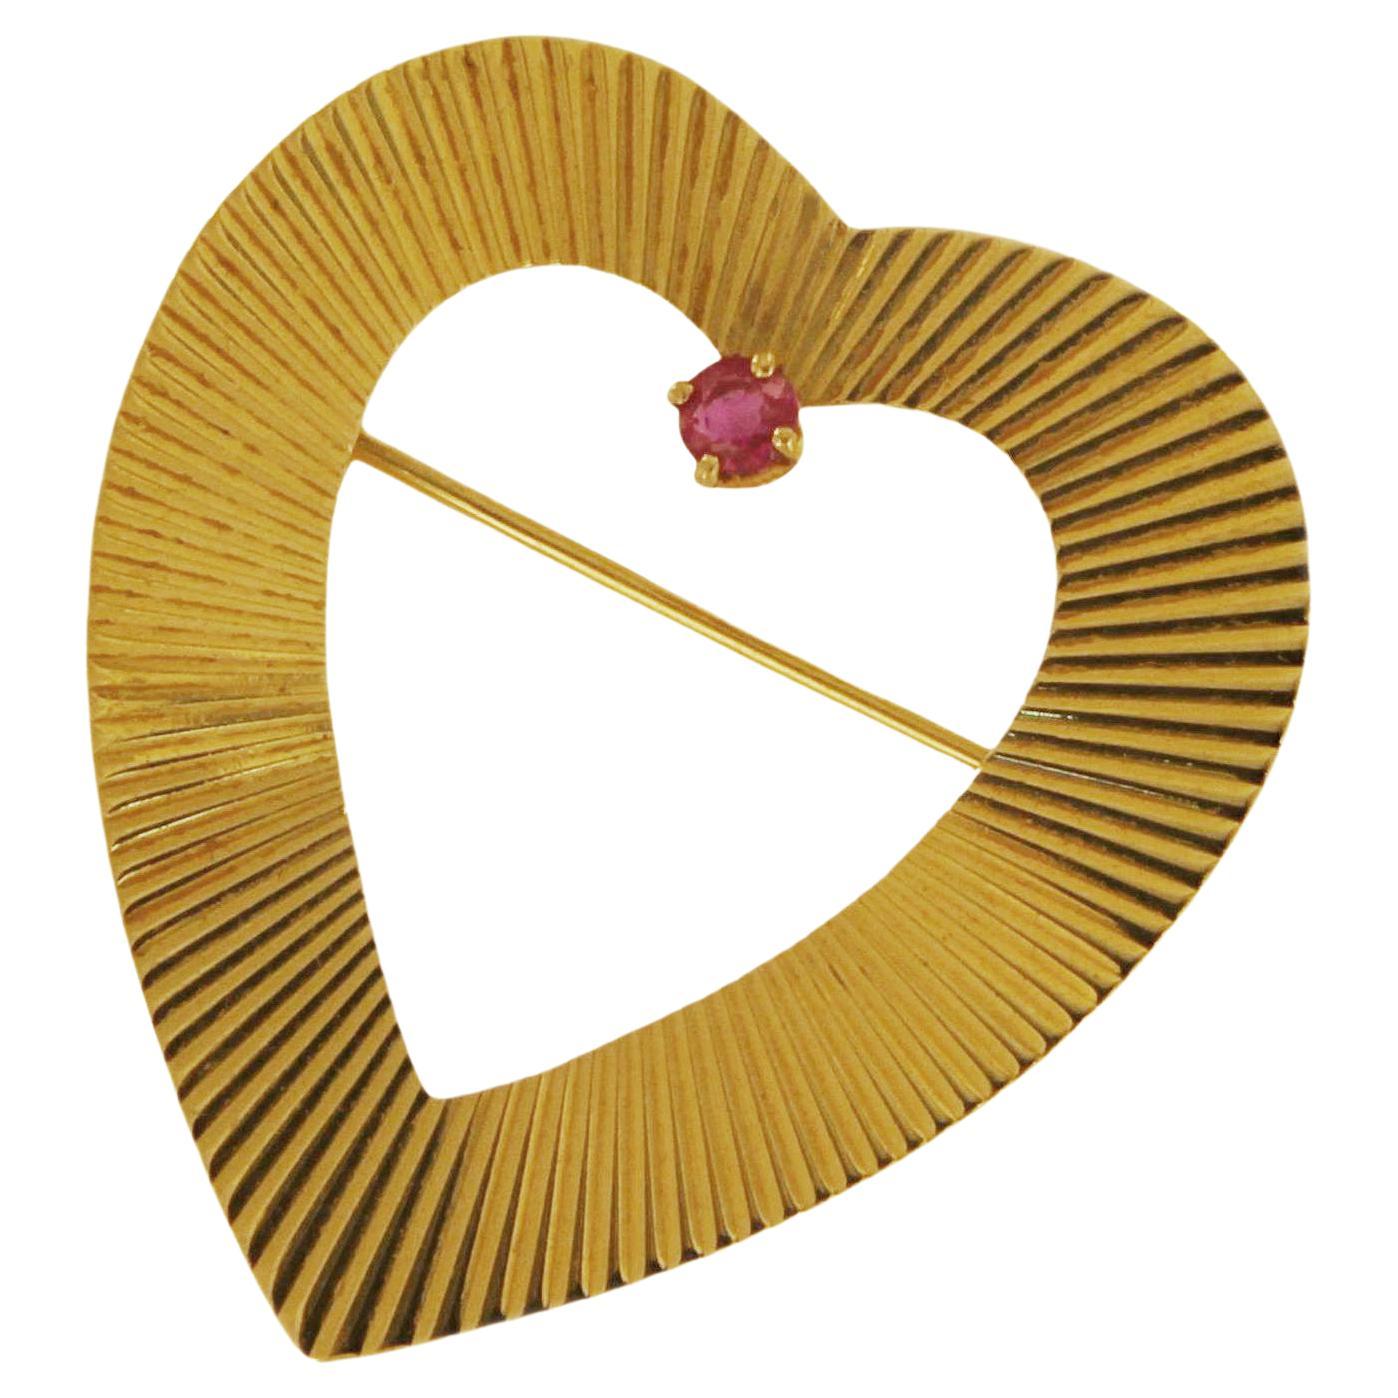 Tiffany & Co. 14k Yellow Gold Heart Pin Brooch with Ruby For Sale